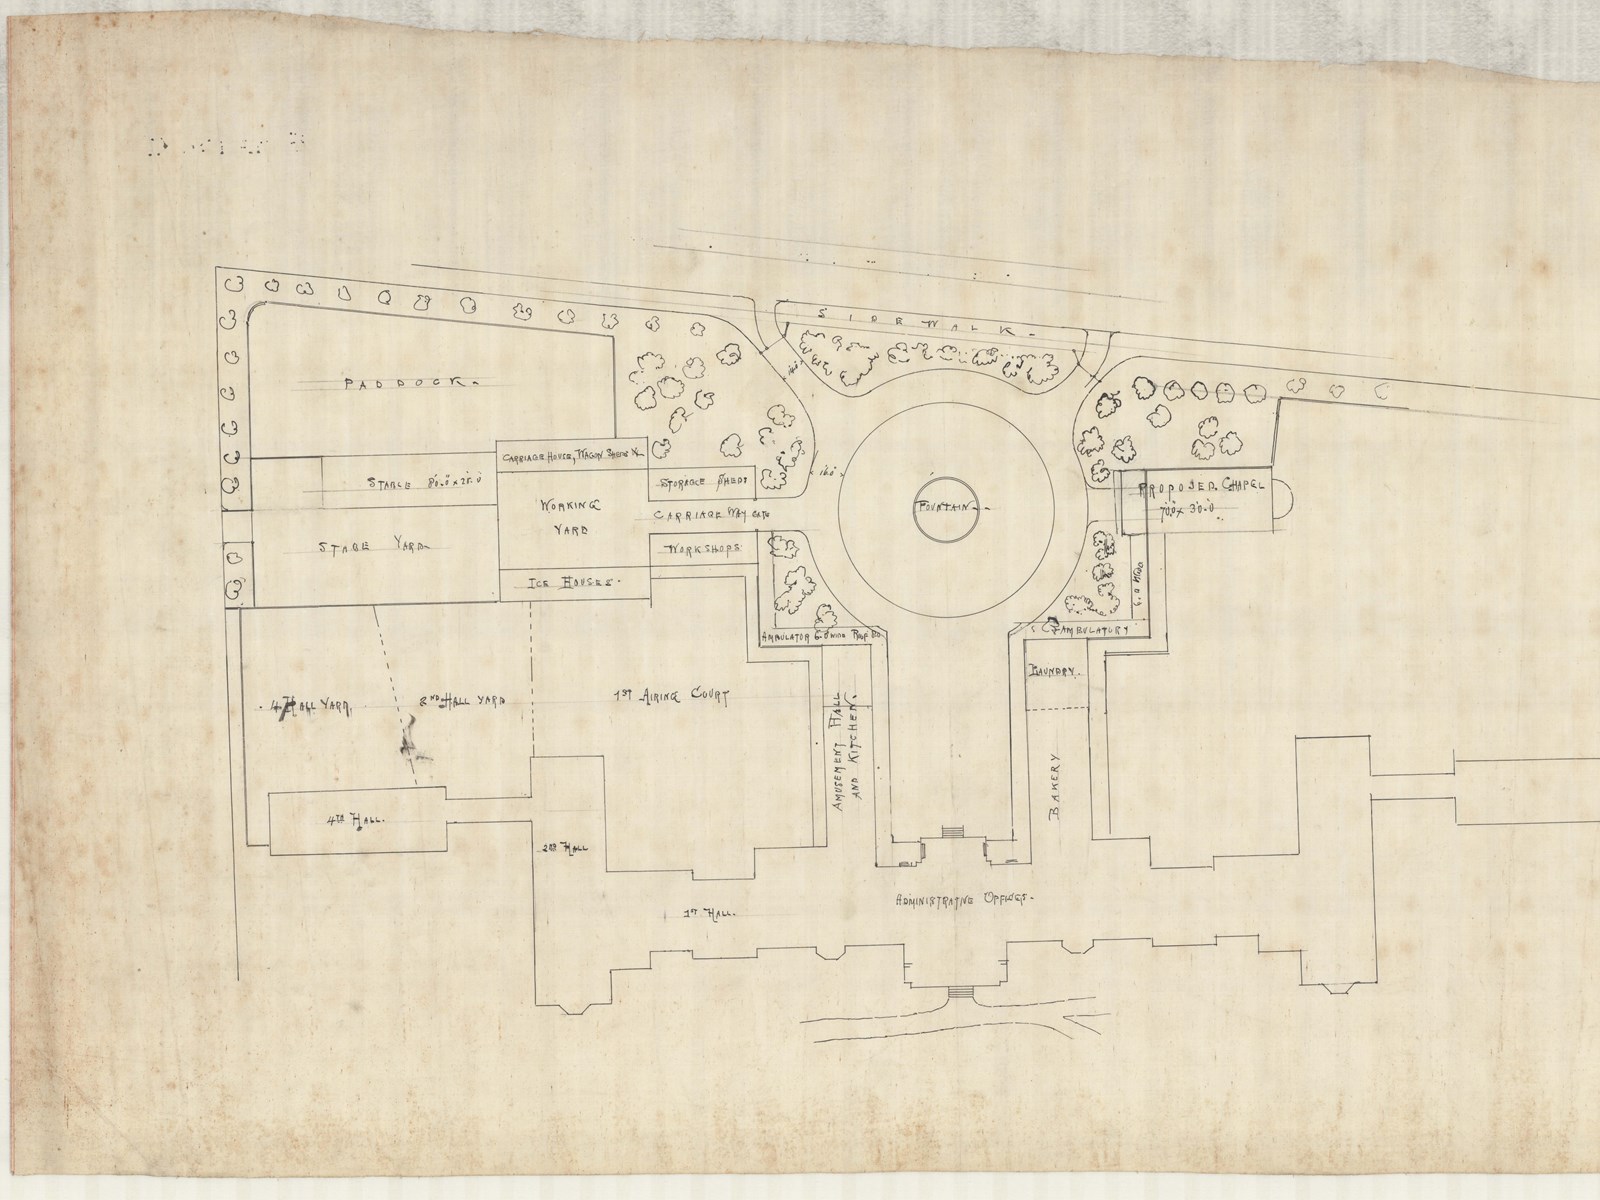 Pencil plan of large symmetrical building in front of circular drive with lawn areas